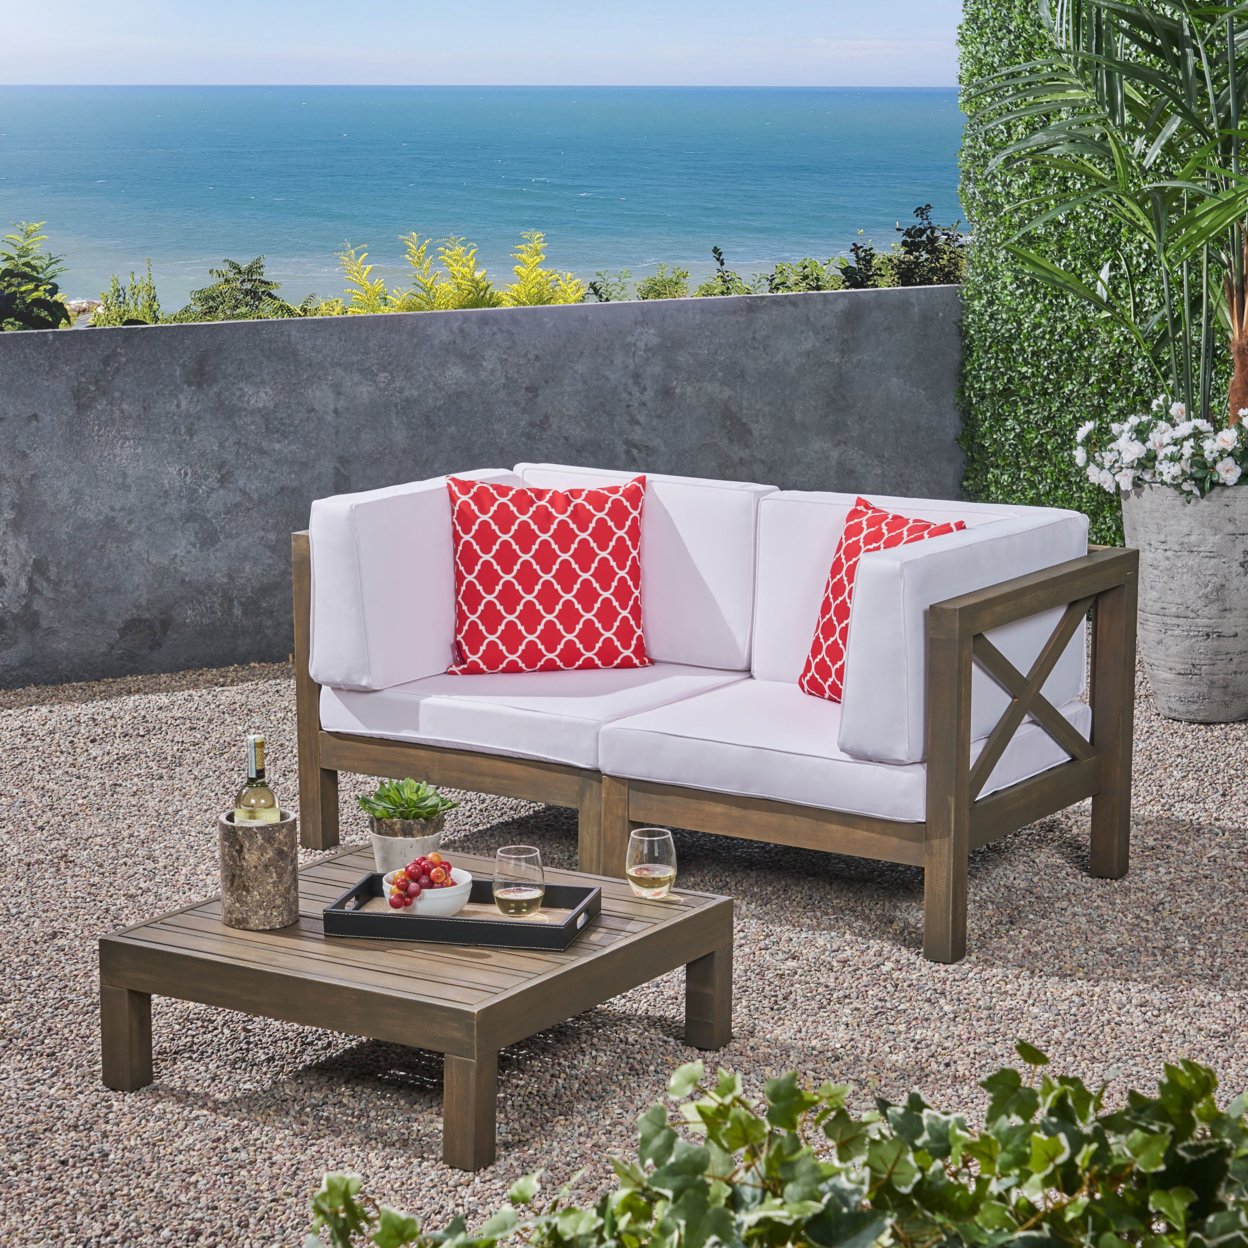 Great Deal Furniture Keith Outdoor Sectional Loveseat Set With Coffee Table 2-Seater Acacia Wood Water-Resistant Cushions - Dark Gray